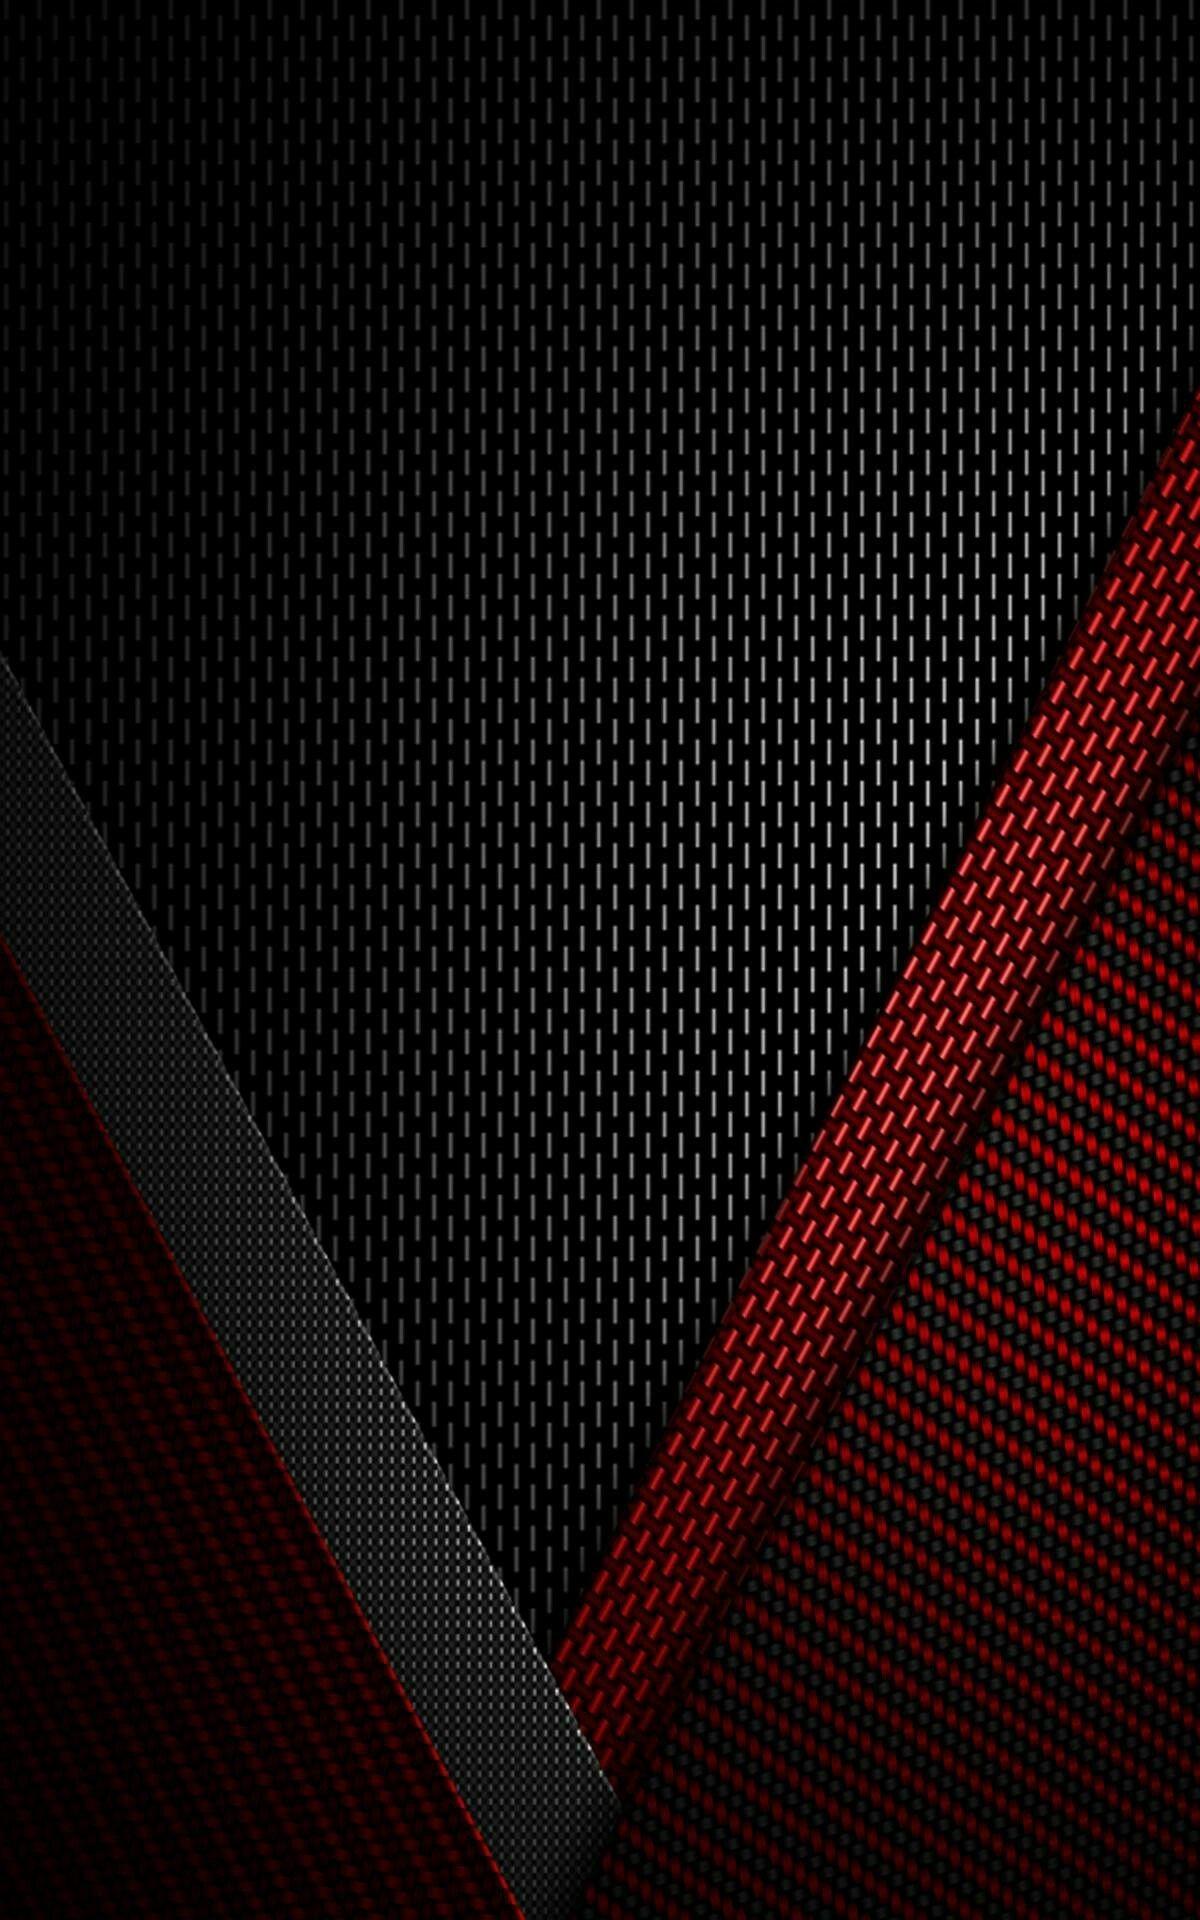 Black Hd Wallpapers 1080P For Mobile - pic-connect